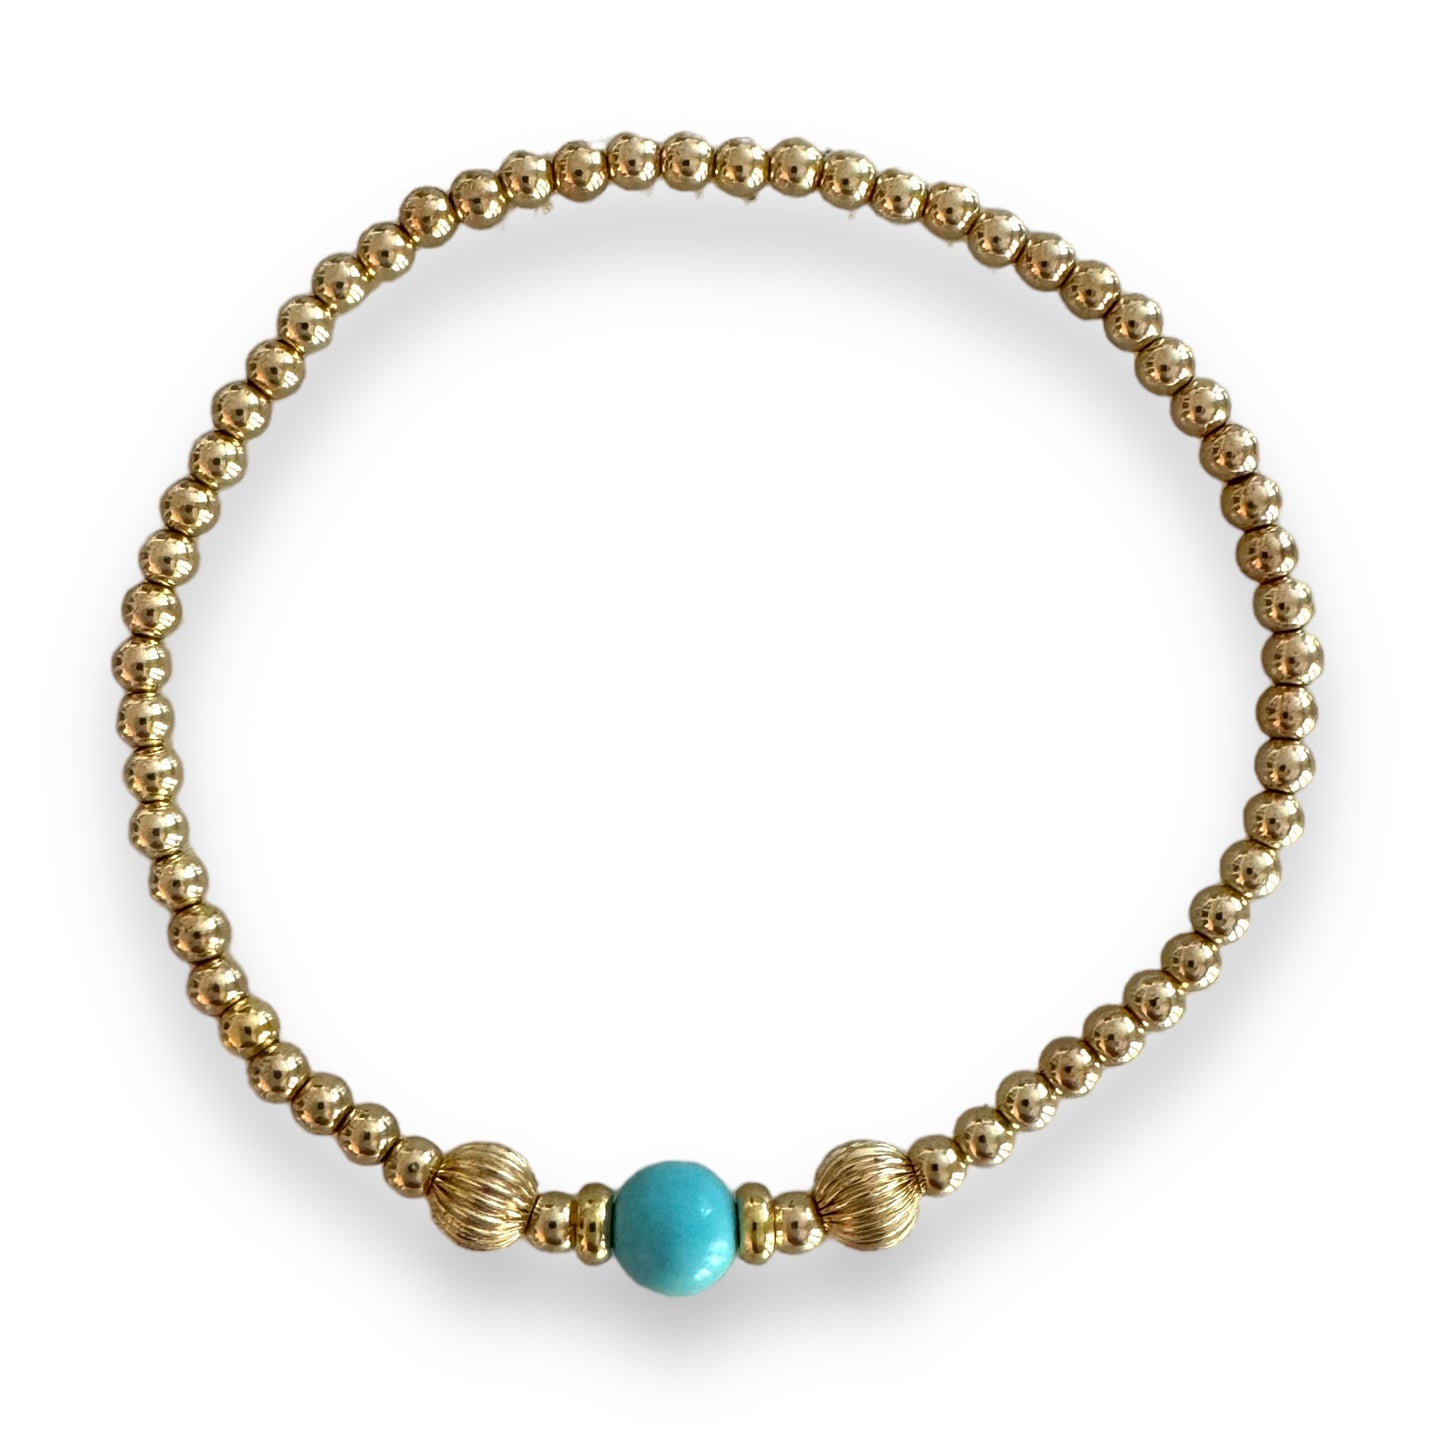 Turquoise and Corrugated Accented Gold Filled Beaded Bracelet